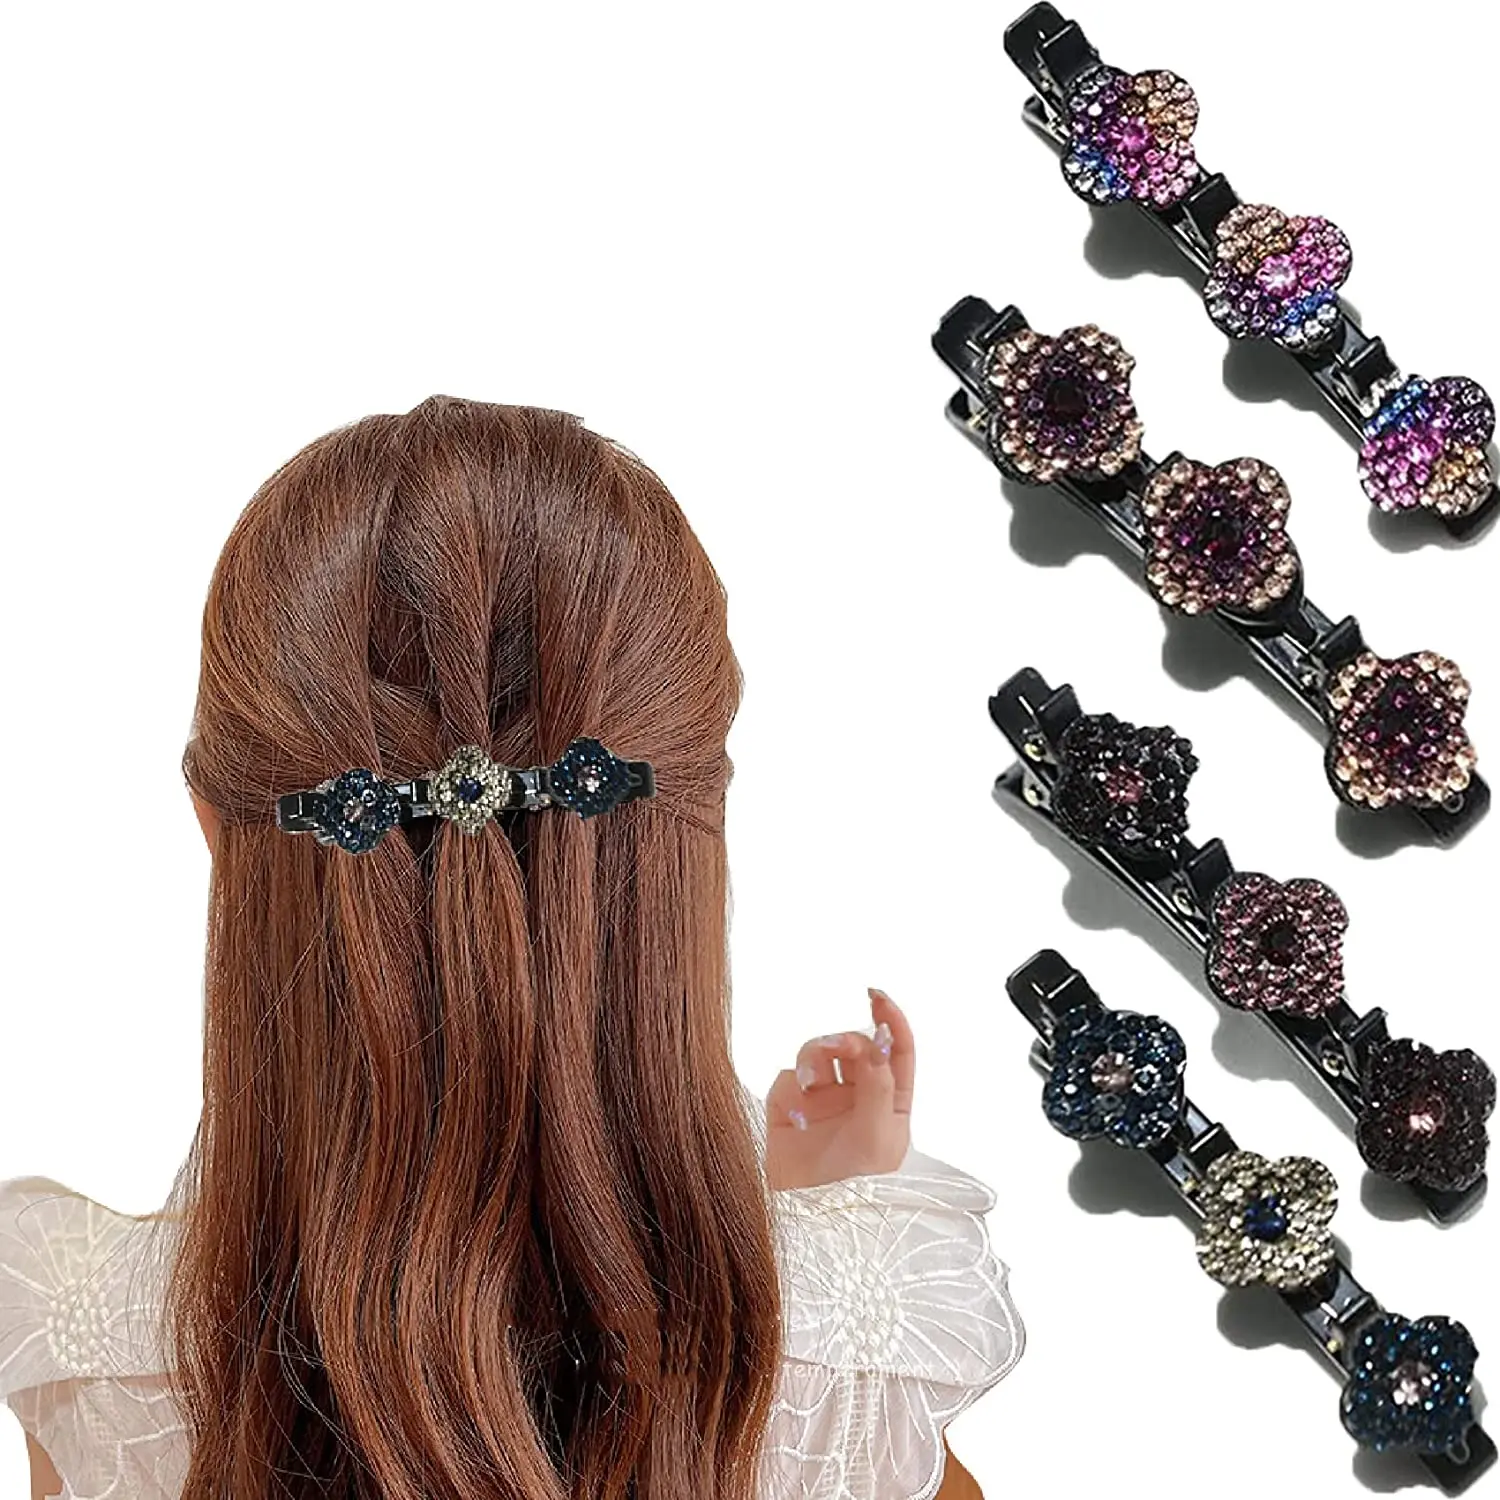 Sparkling Crystal Stone Braided Hair Clips, Satin Fabric Hair Bands, Rhinestone Hair Clips, Braided Hair Clip with Rhinestones 10pc good performance cheap price diamond and cbn honing stick bar stone with slot